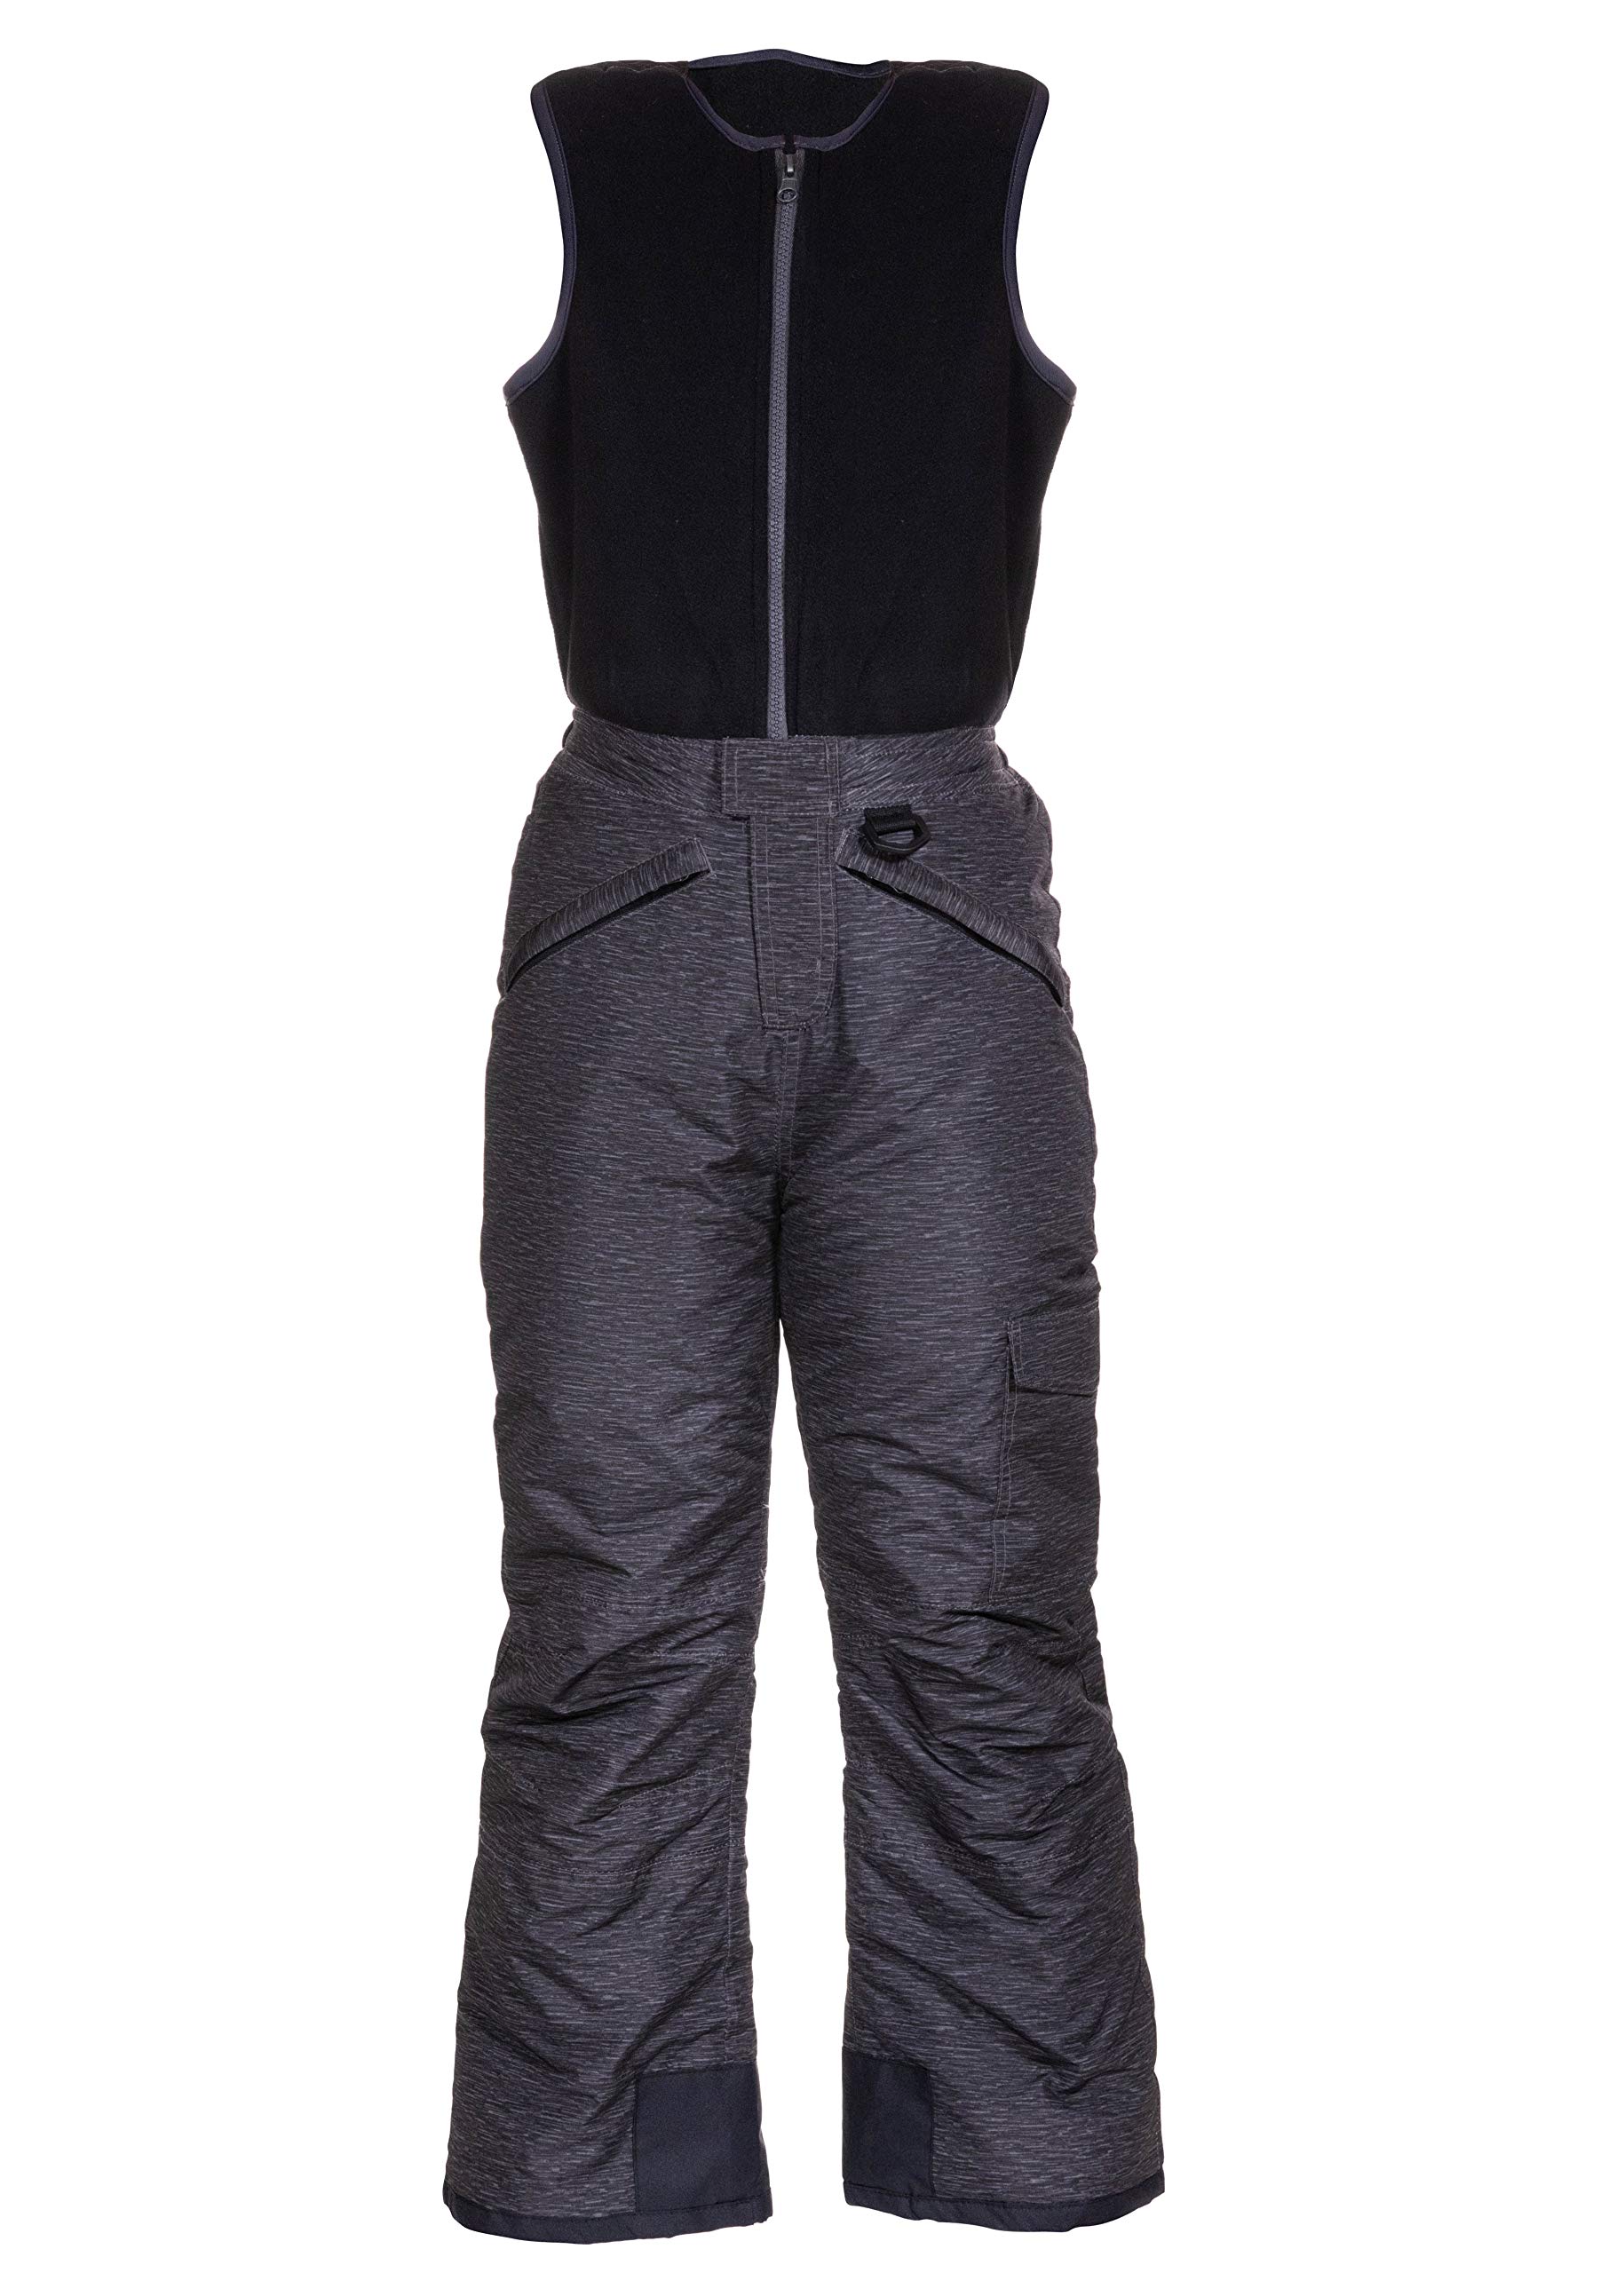  Arctic Quest Insulated Ski and Snow Pants for Boys and